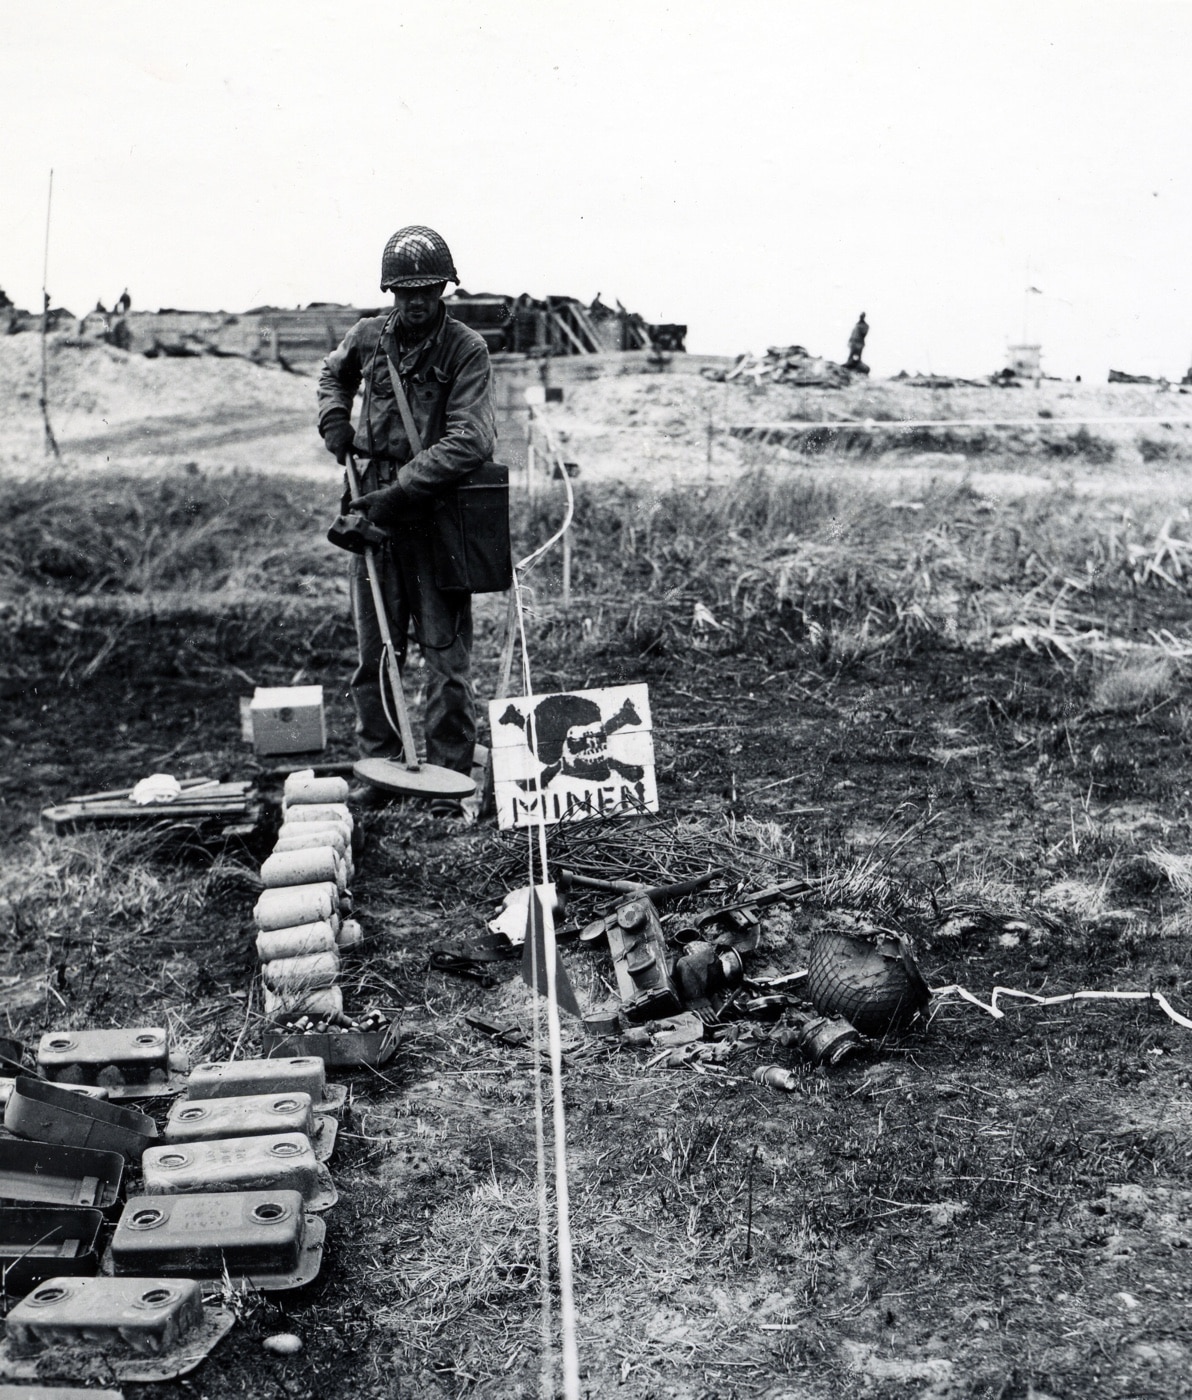 Here we see a U.S. soldier with a mine detector in Normandy at Atlantic Wall. Areas cleared were marked in white tape.